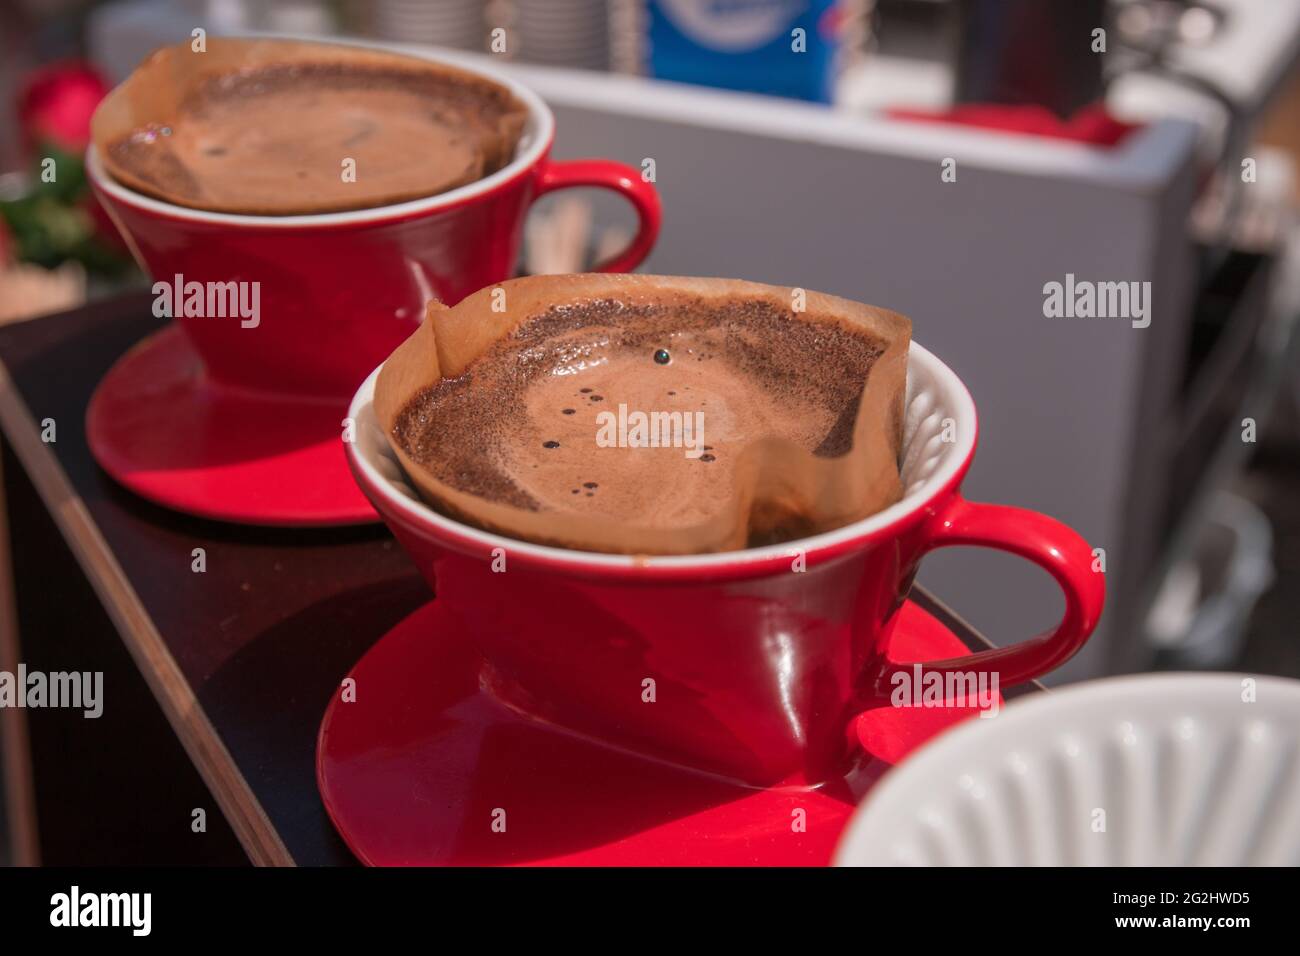 Freshly brewed, hot coffee in the coffee filter. Stock Photo